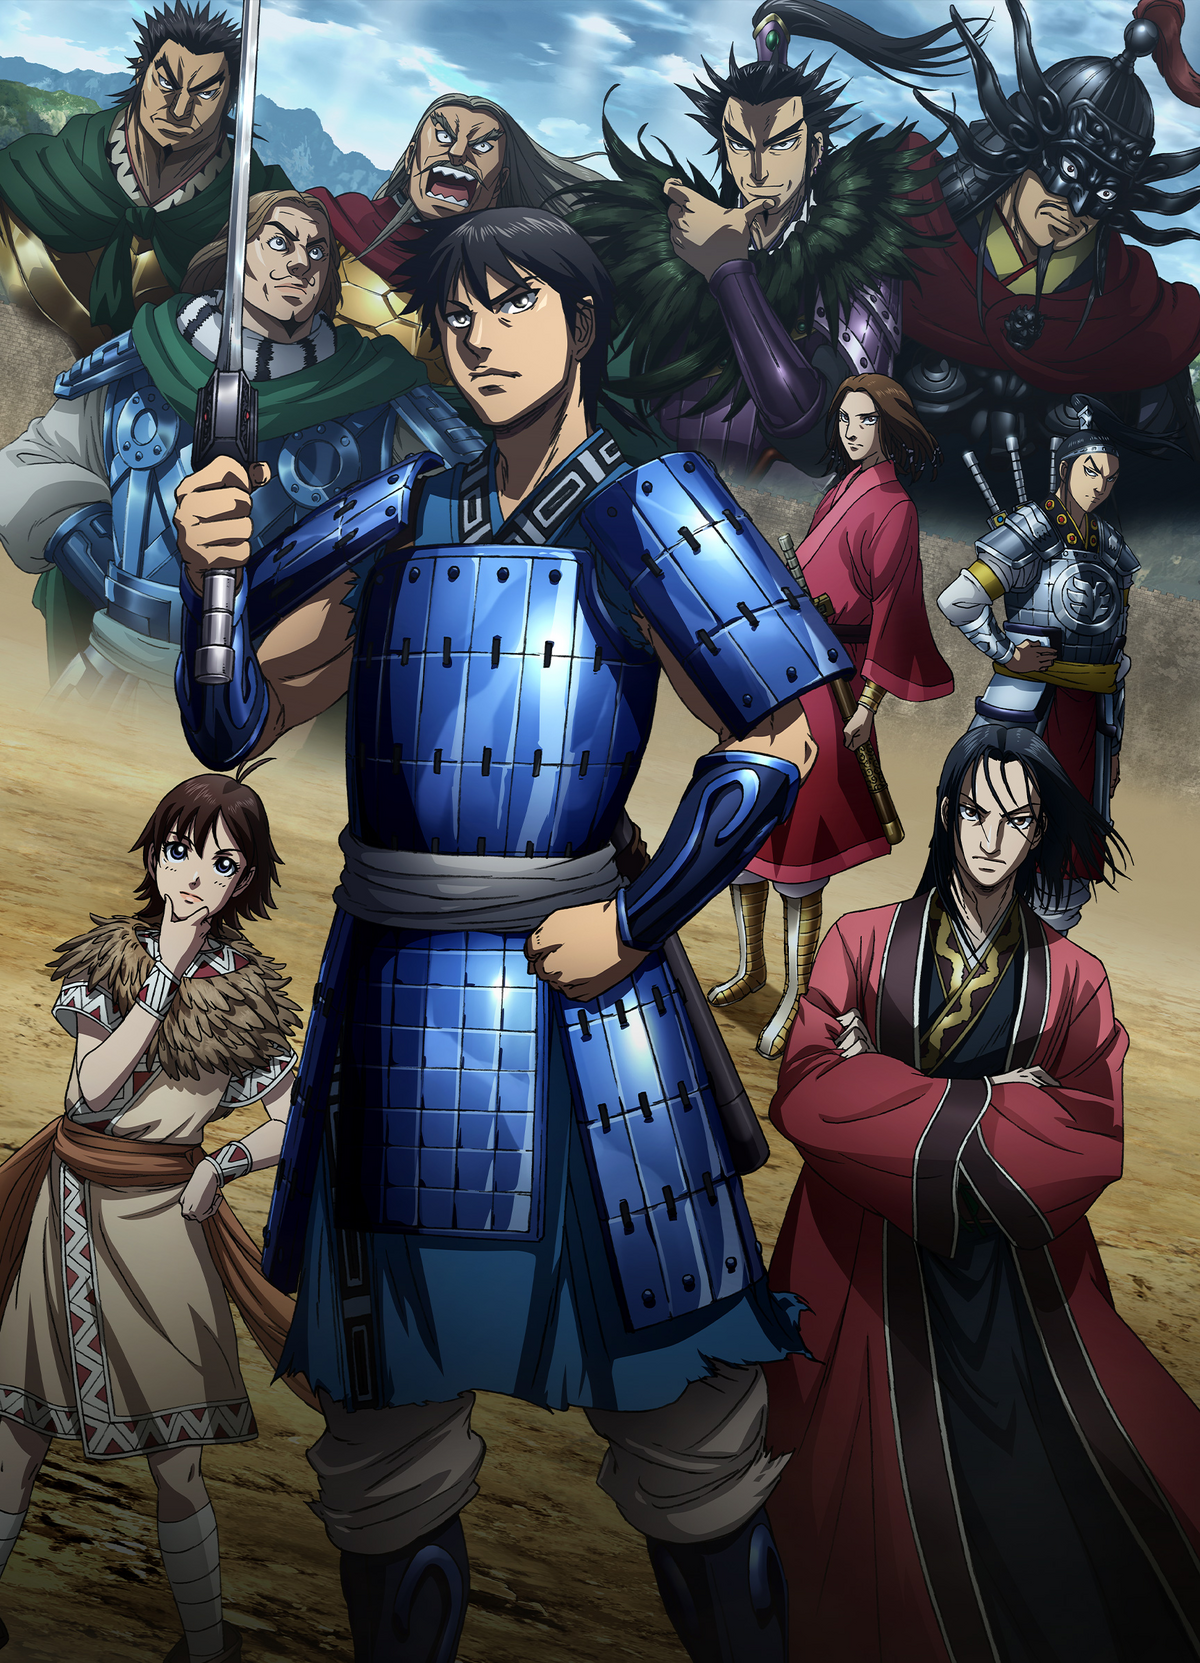 New visual from upcoming S3 of anime : r/Kingdom